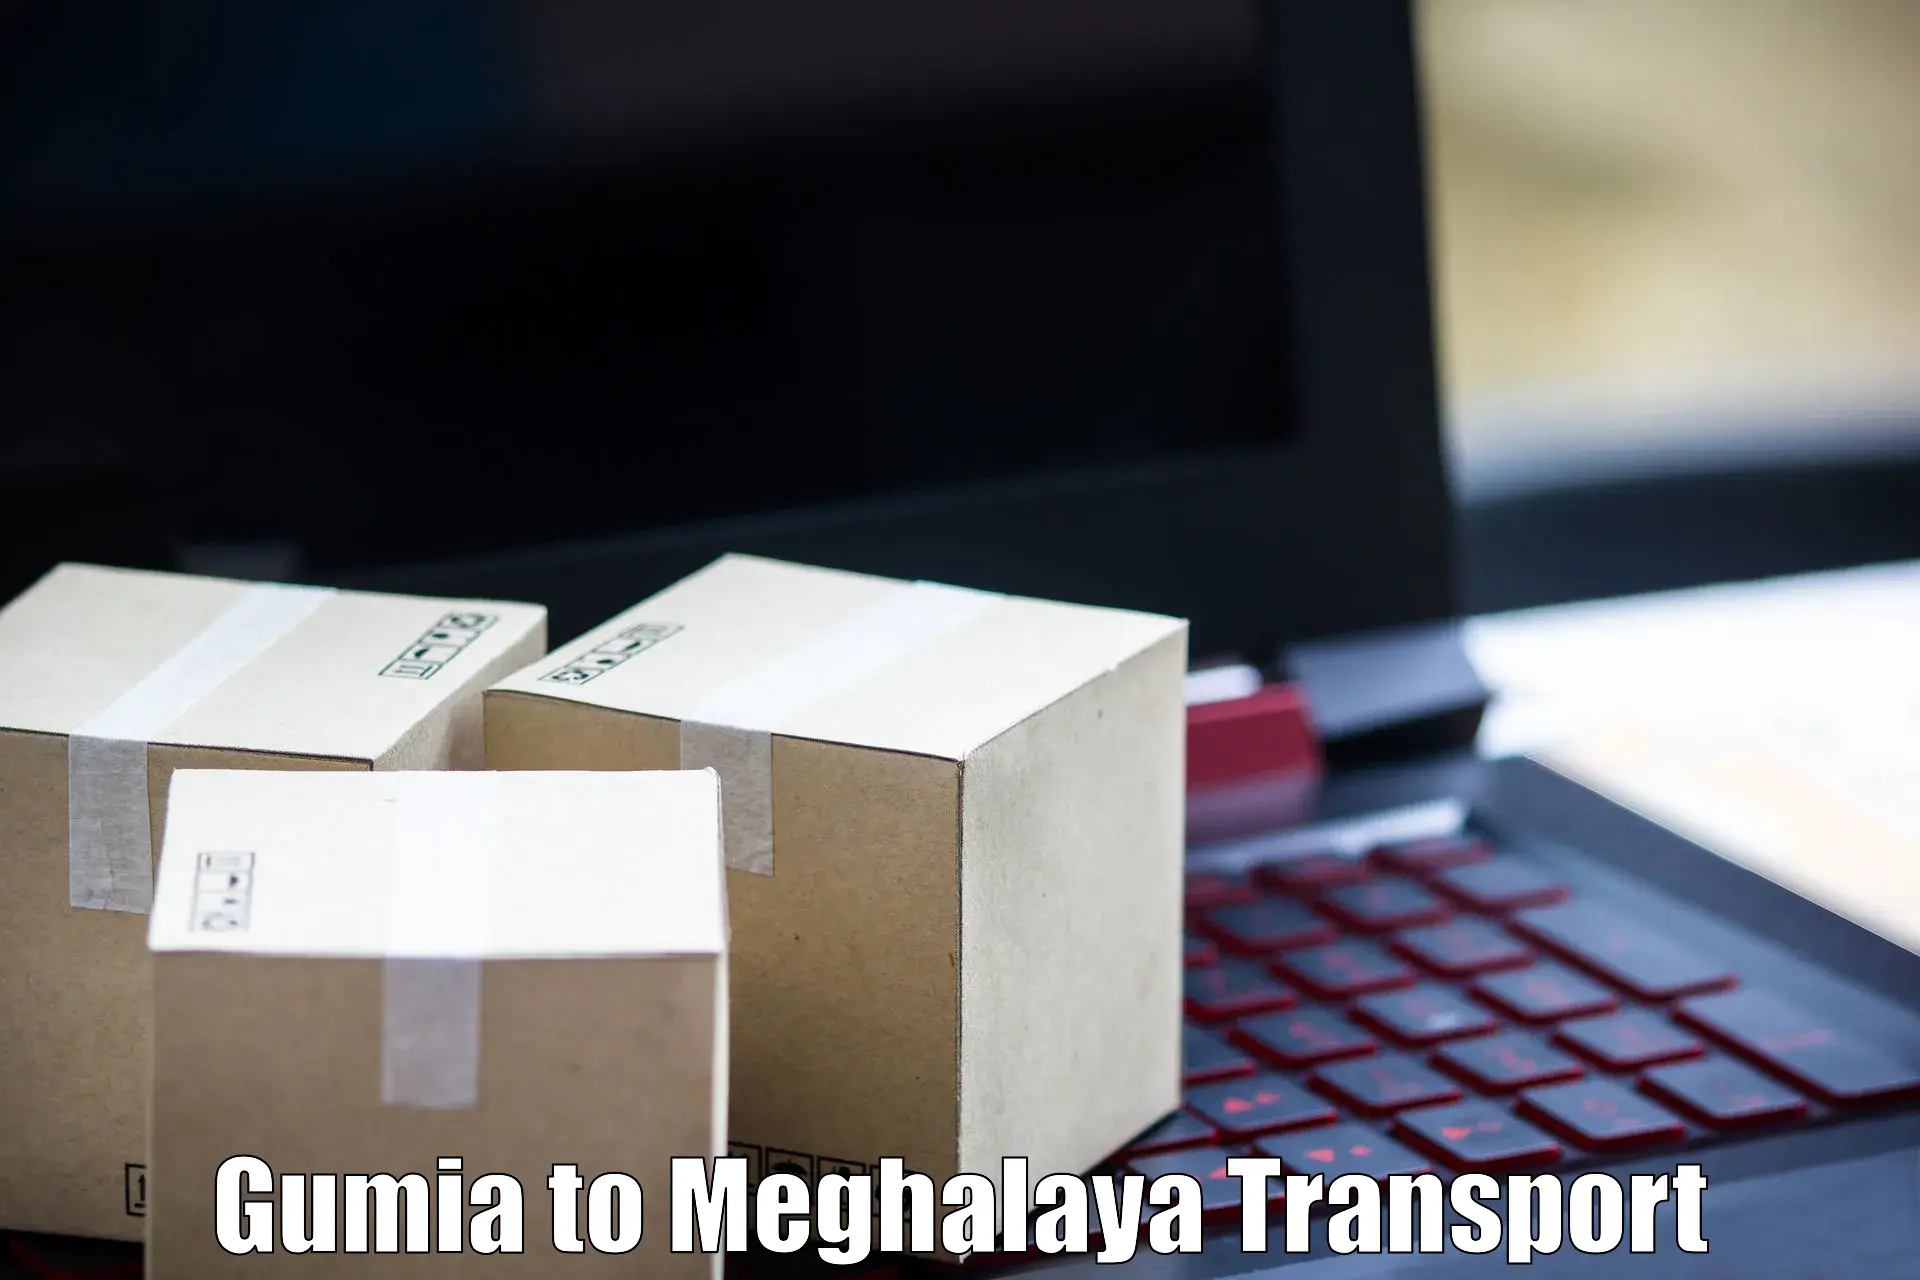 Online transport service Gumia to Umsaw